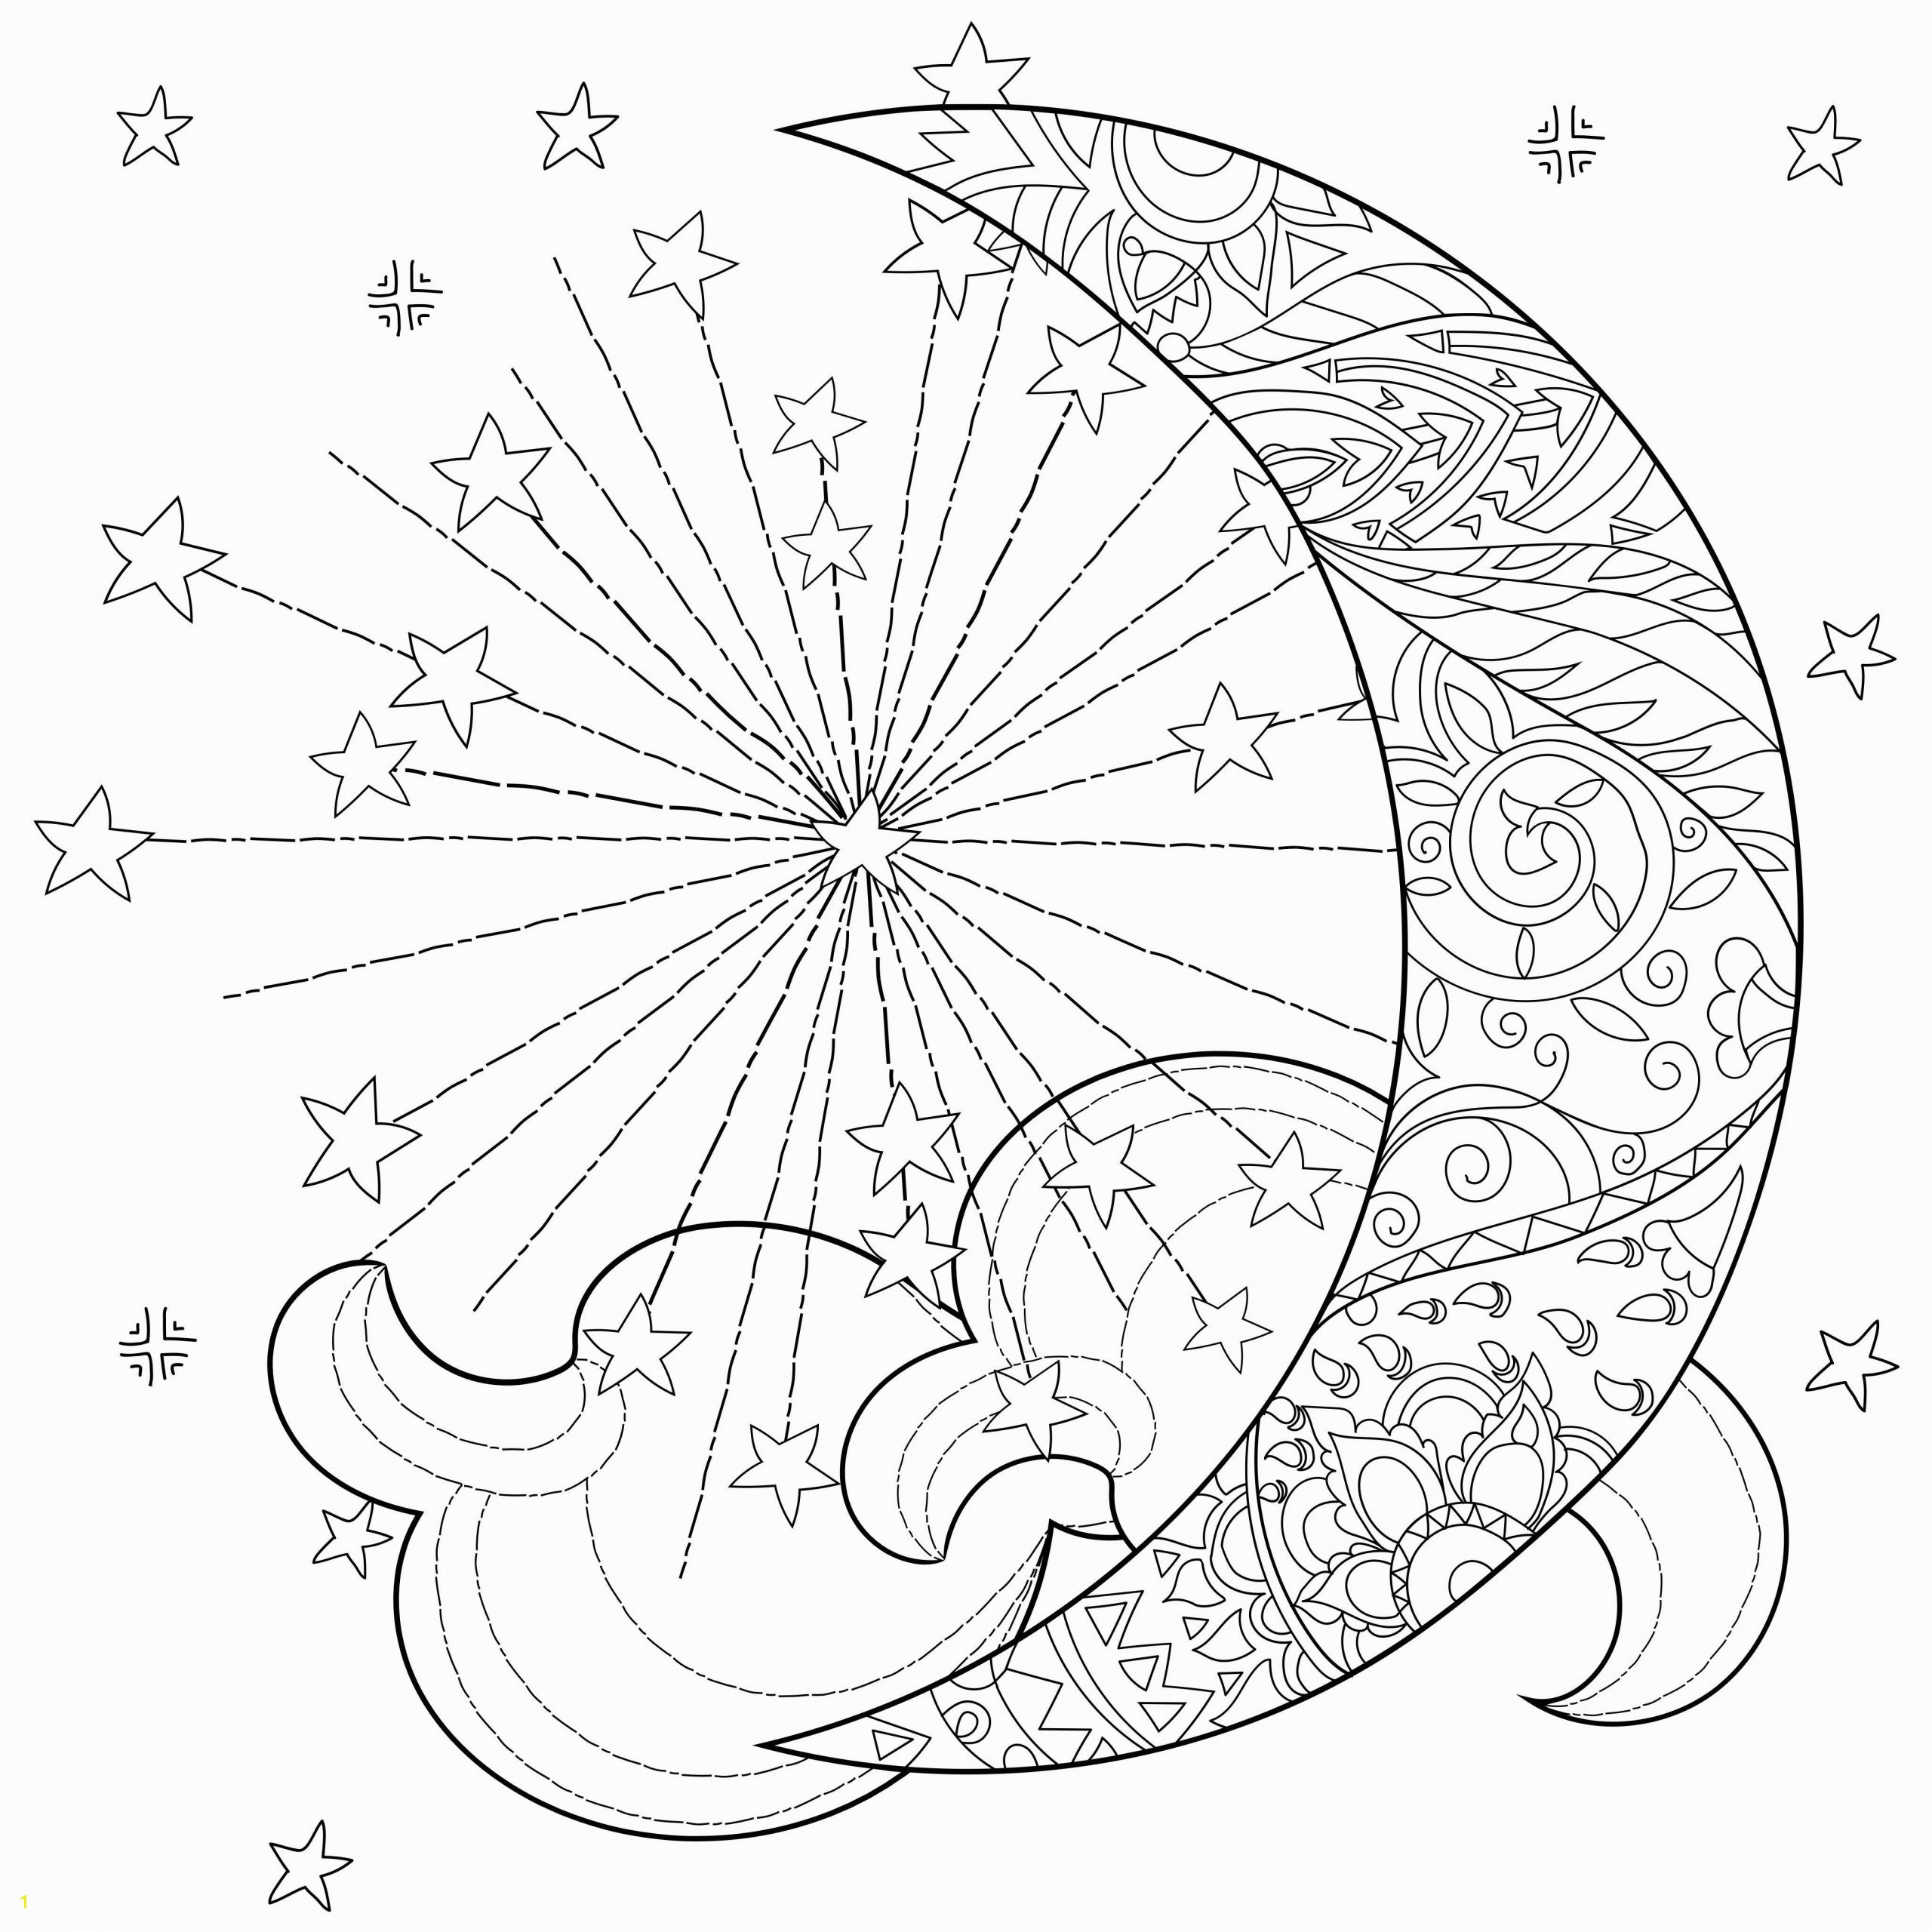 Celestial Moon Coloring Pages for Adults Celestial Sun Moon Coloring Page